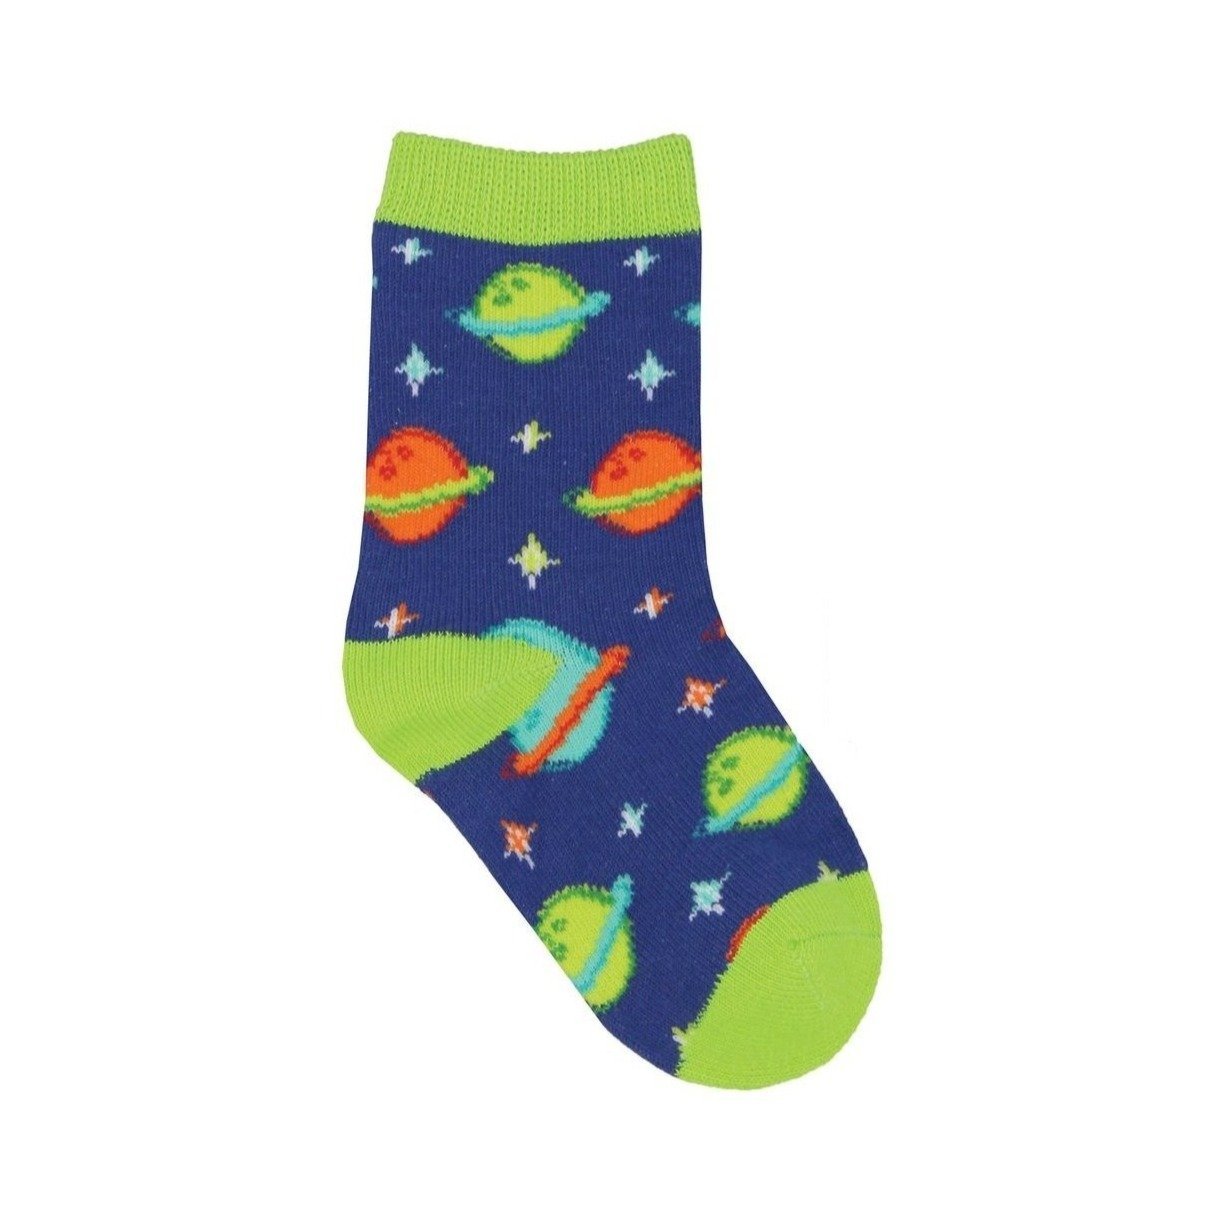 Planets and Stars Socks (Ages 1-2)